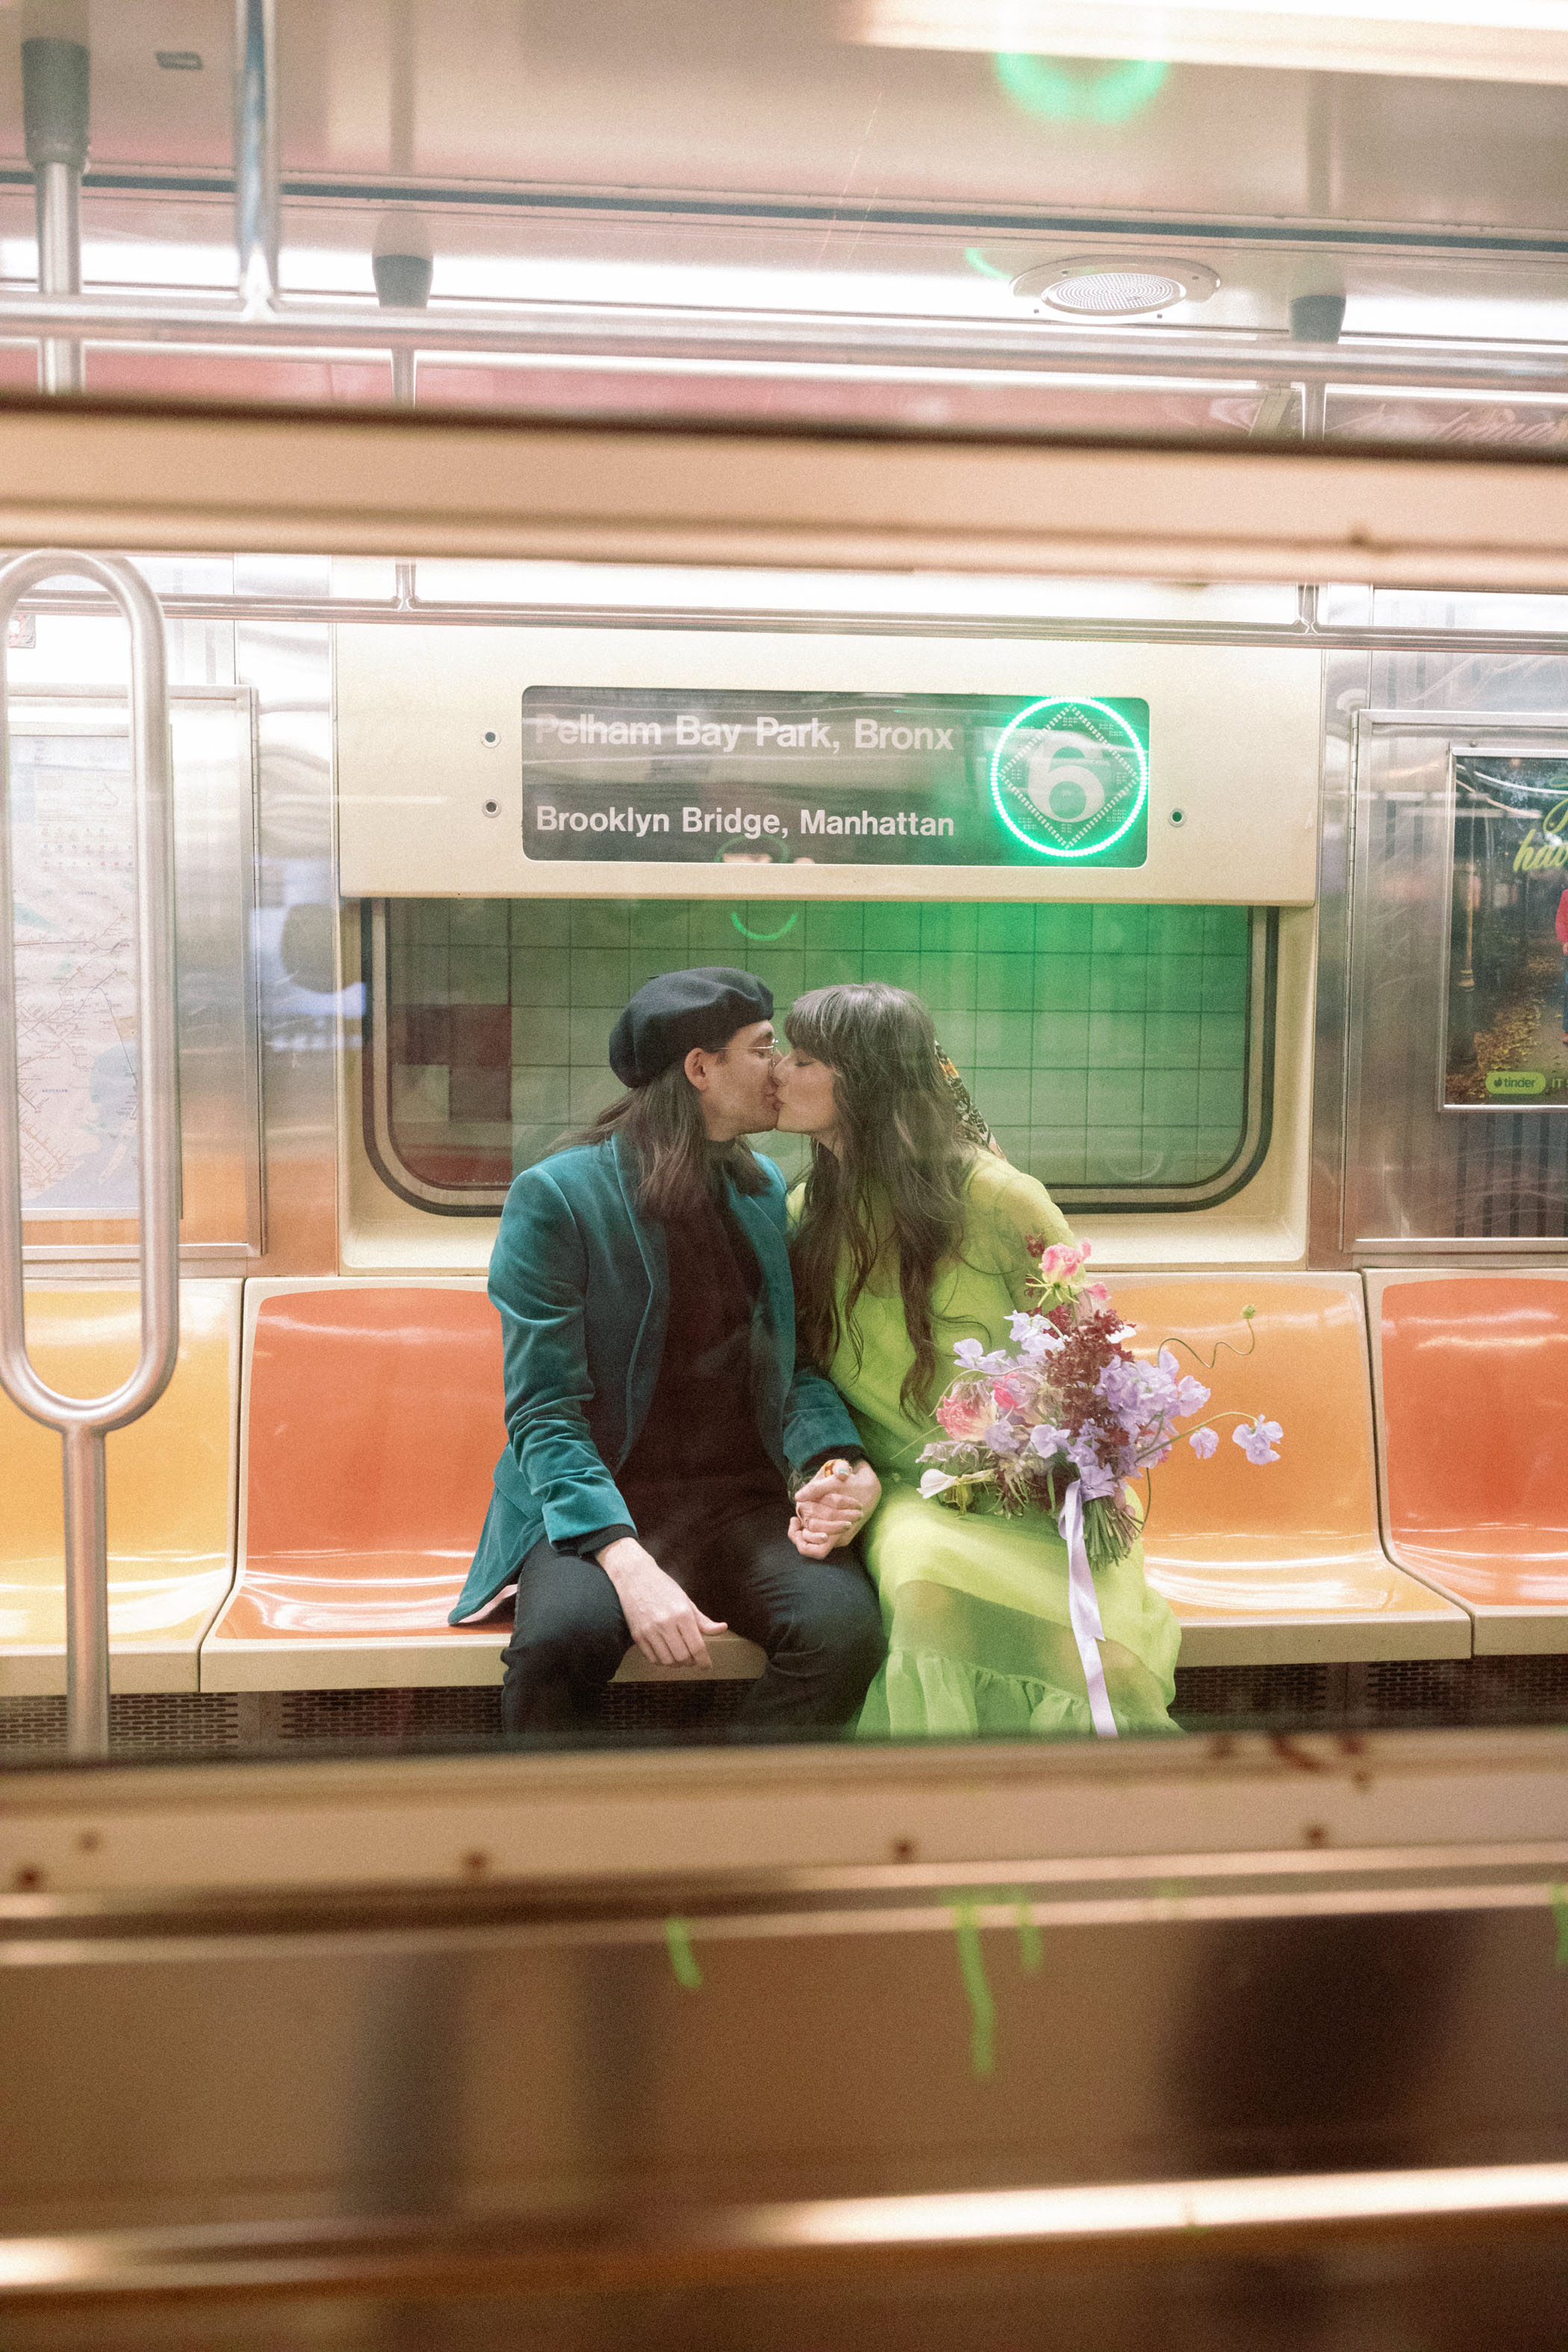 Technicolor Maximalist NYC Elopement Inspiration with Lime Green Dress